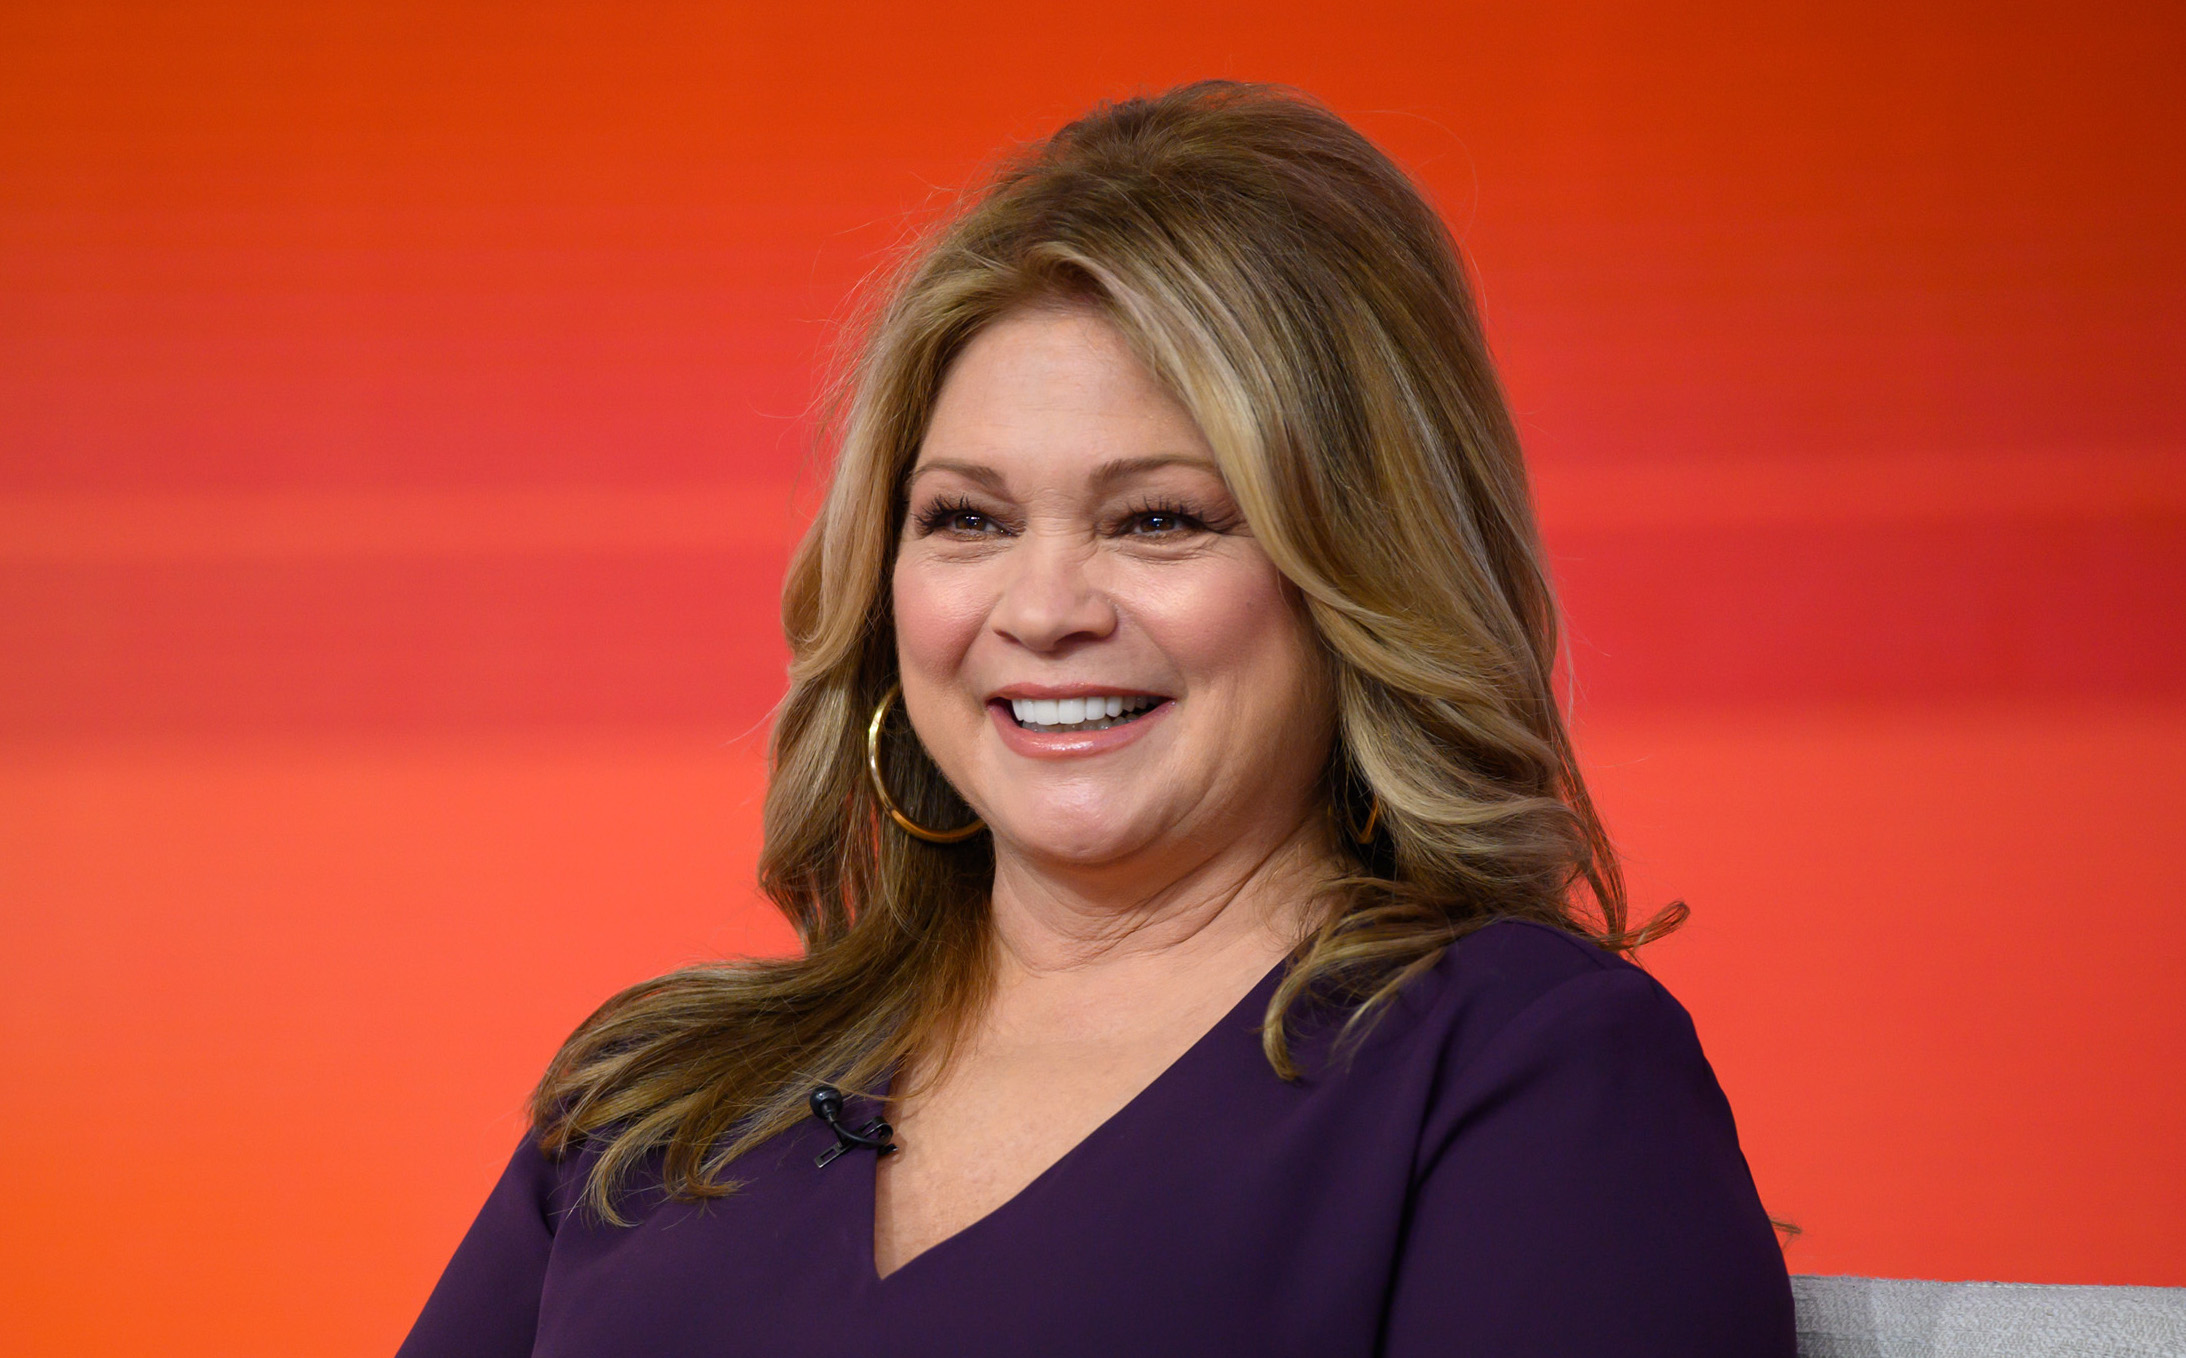 Valerie Bertinelli criticizes Food Network, citing a shift away from cooking and education